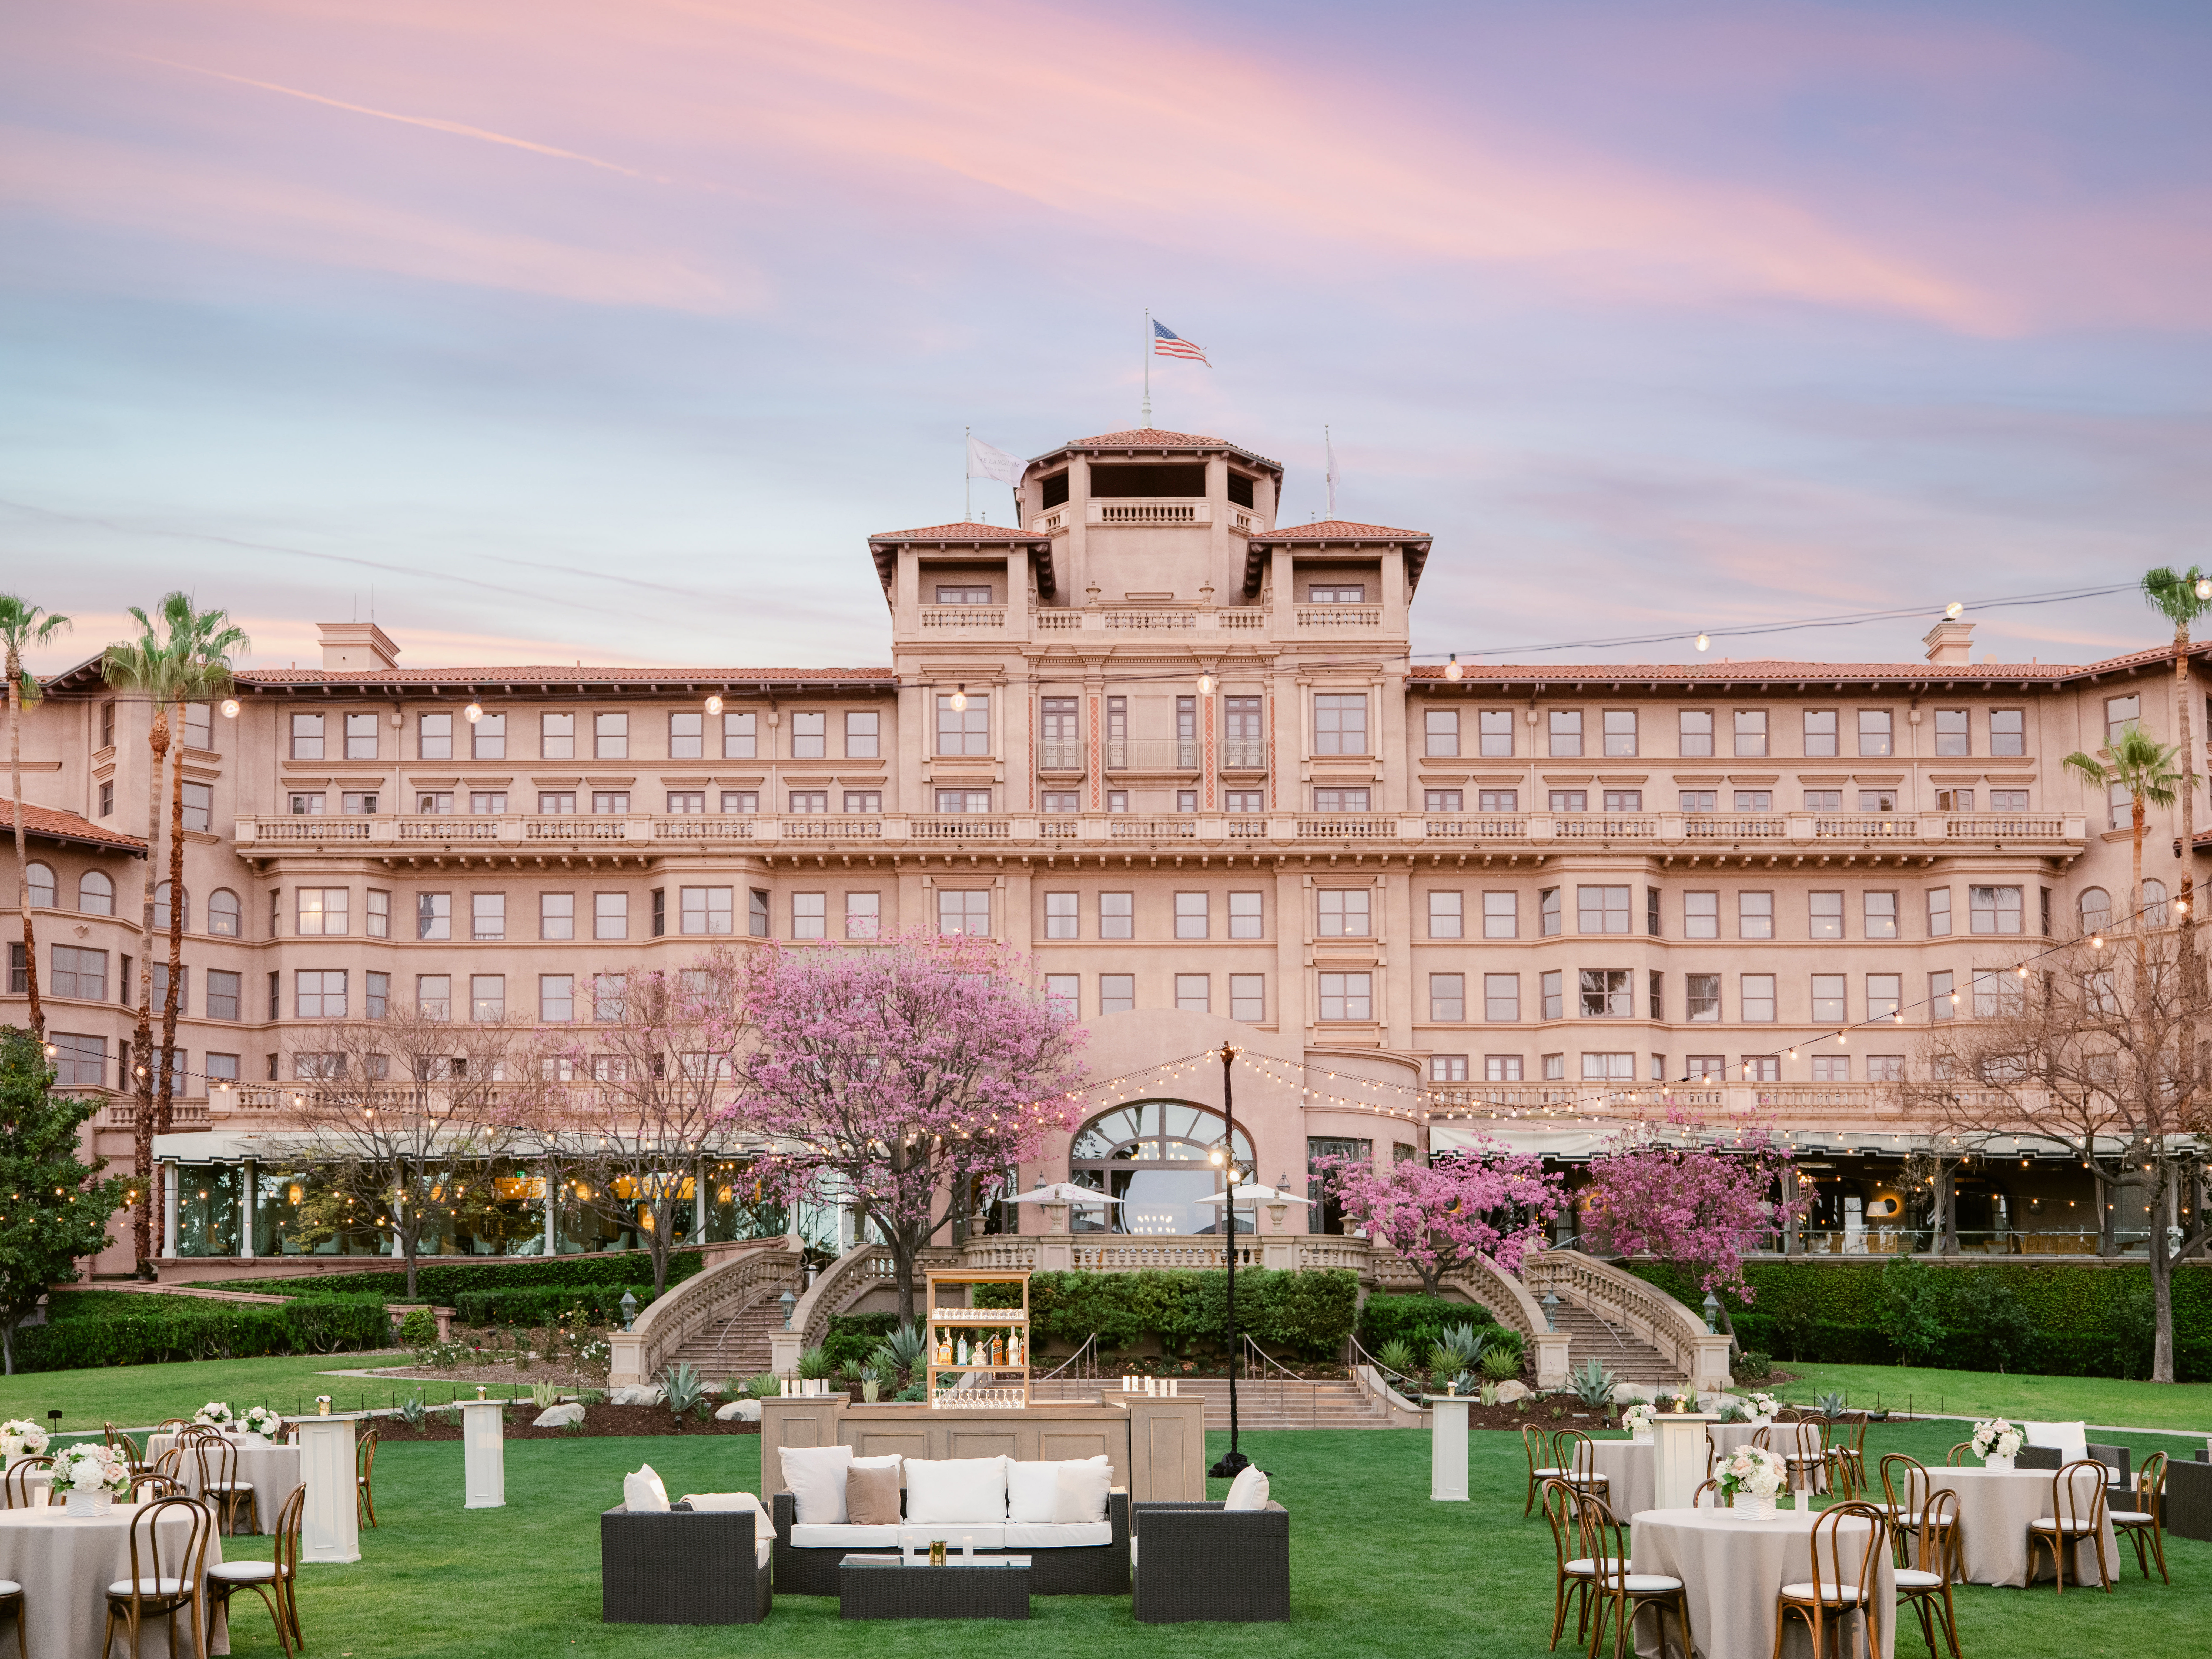 The Langham Huntington, Pasadena, Los Angeles offers over 50,000 square feet of beautiful indoor and outdoor event space.